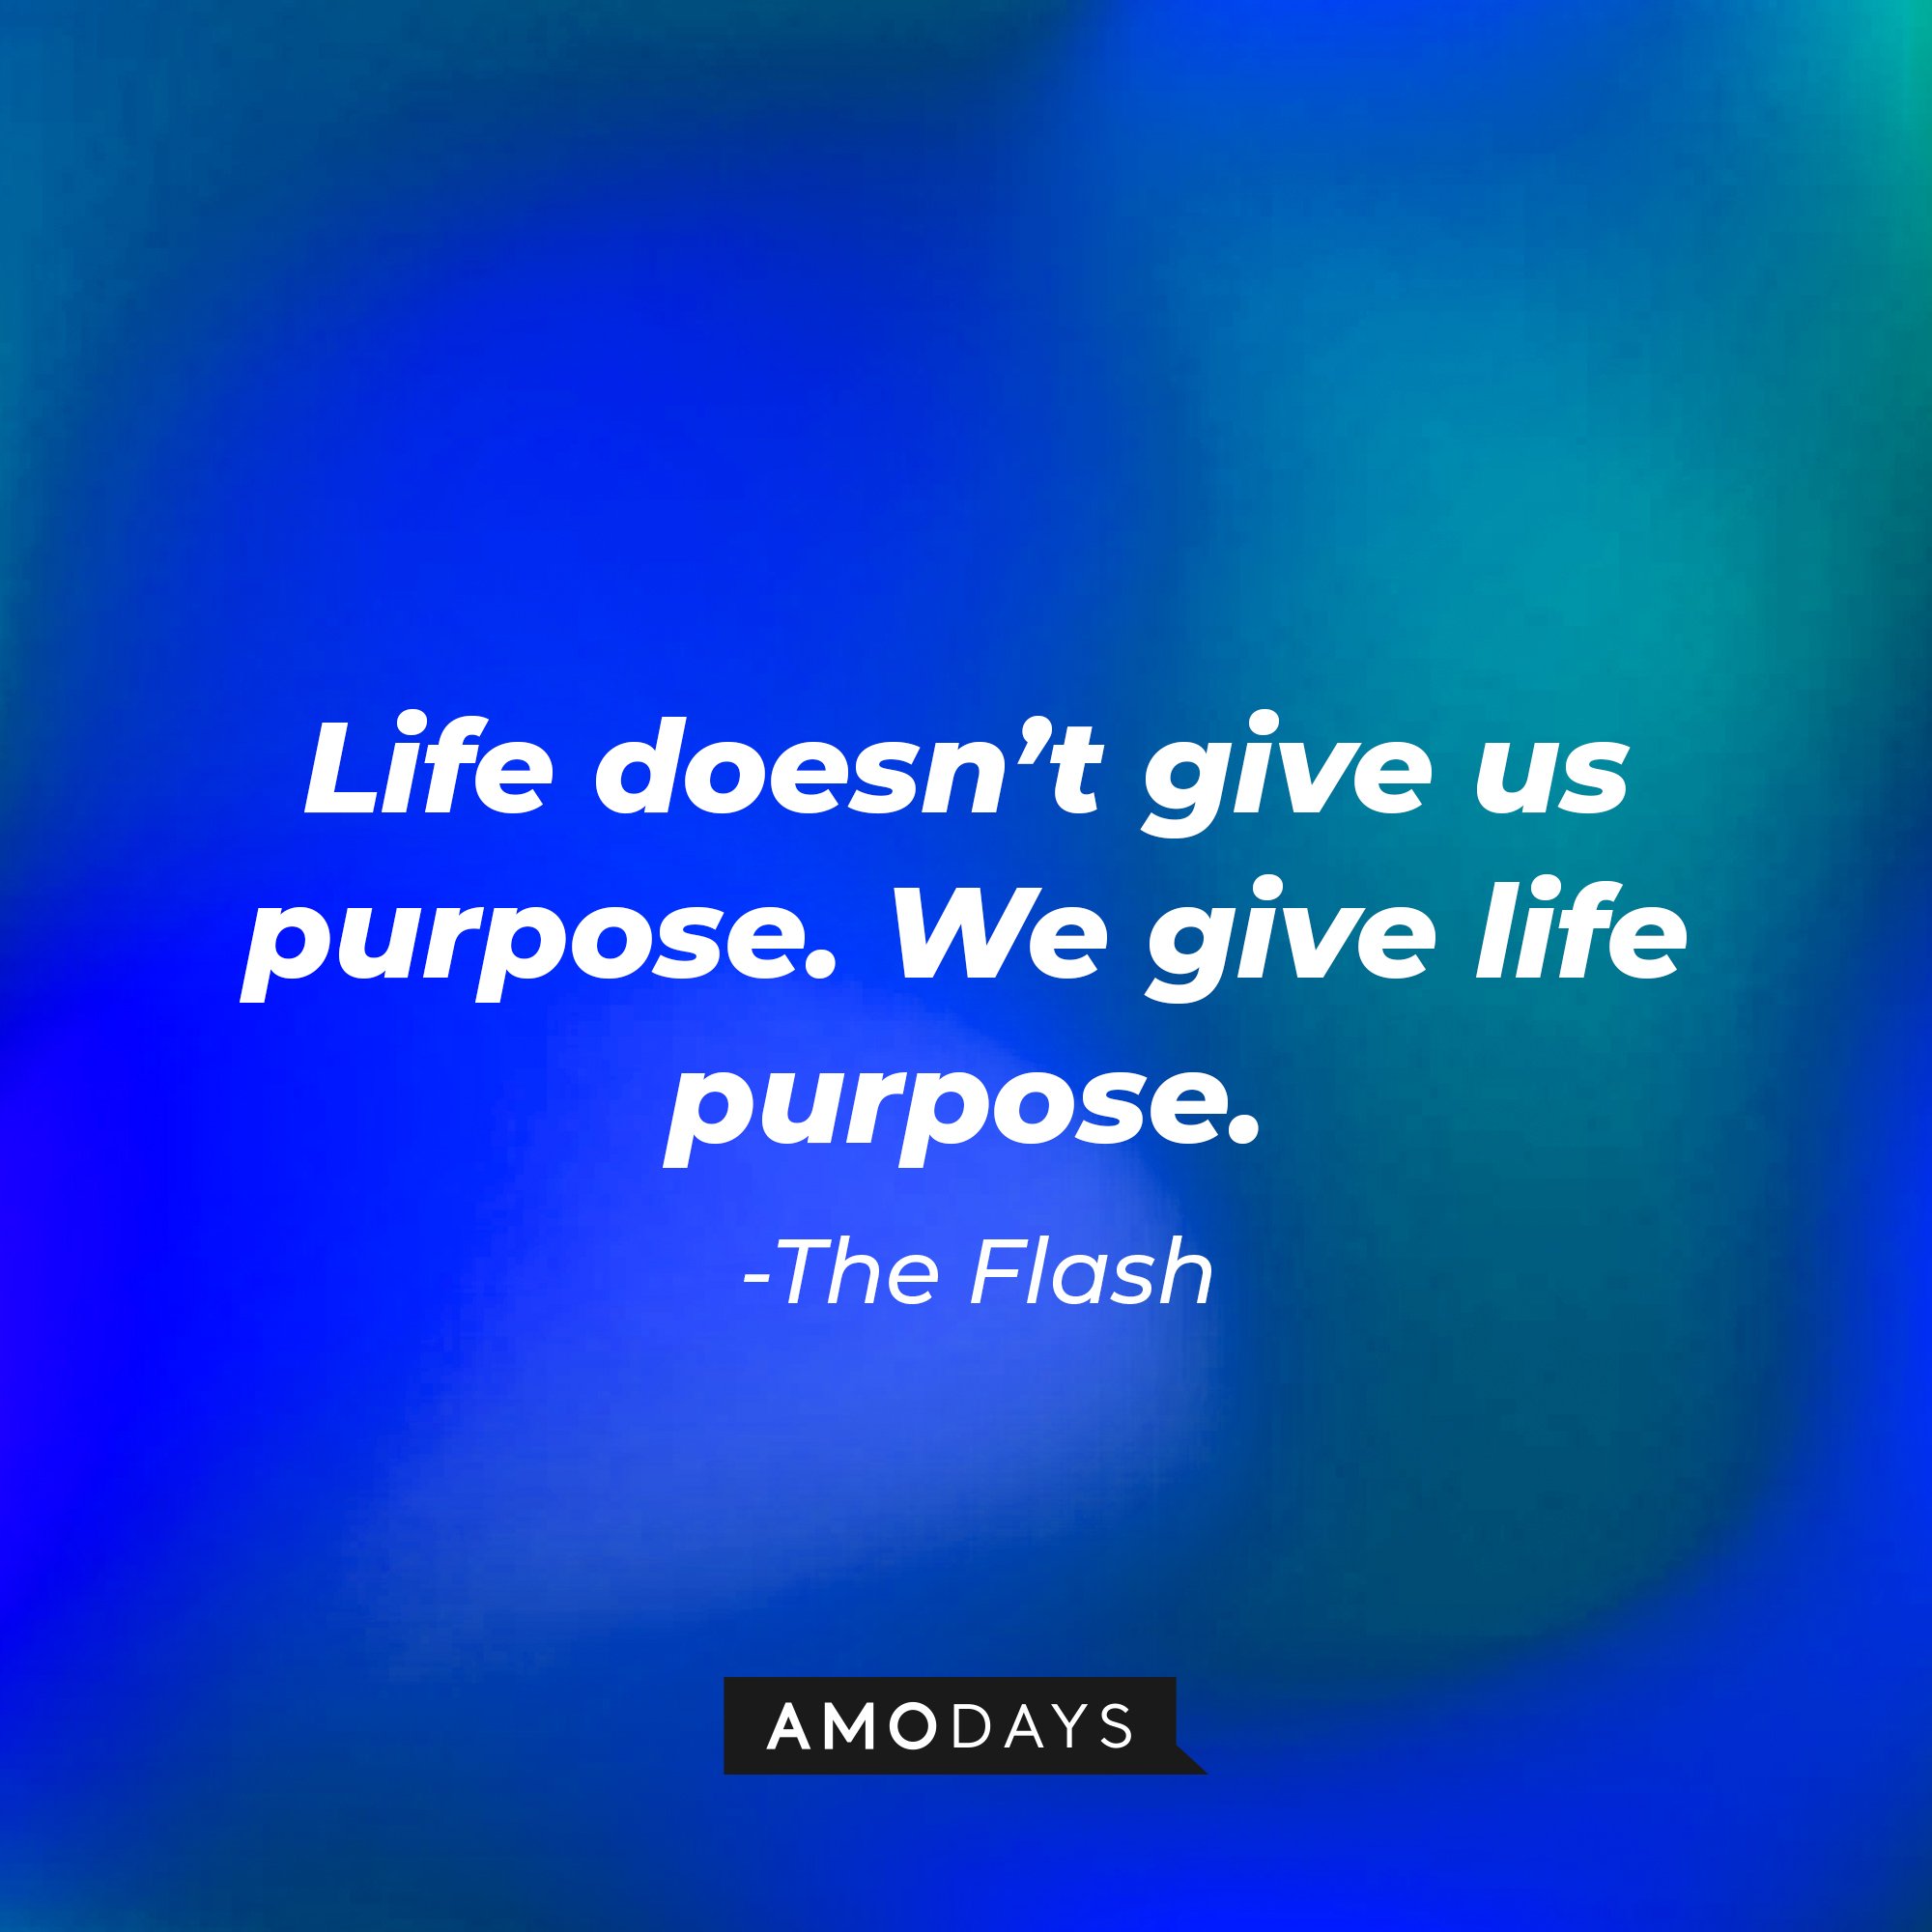 The Flash's quote: “Life doesn’t give us purpose. We give life purpose.” | Image: AmoDays